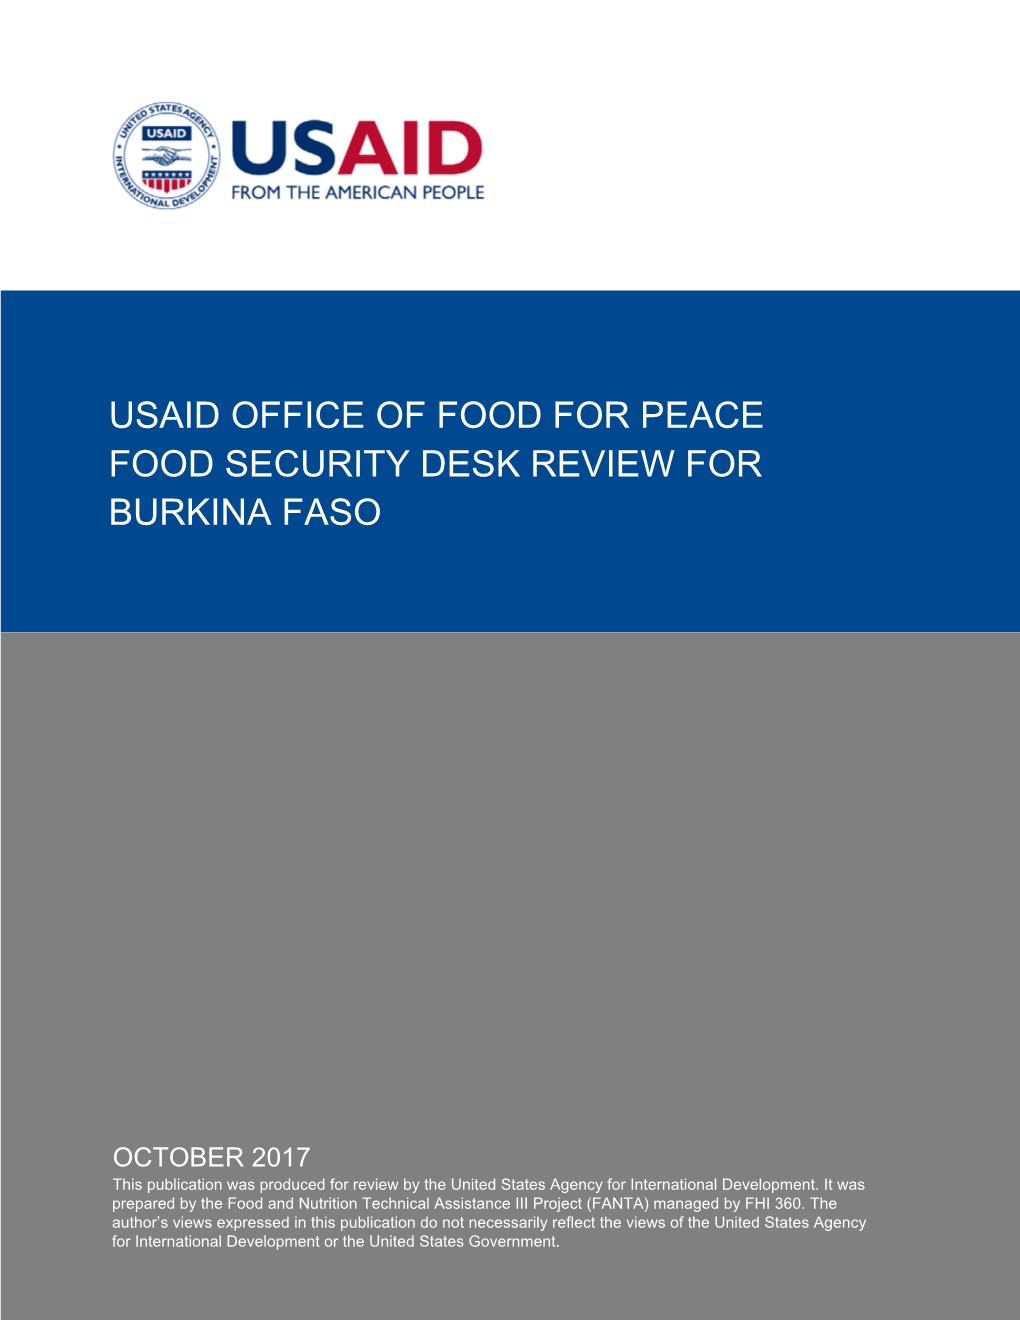 Food for Peace Food Security Desk Review for Burkina Faso